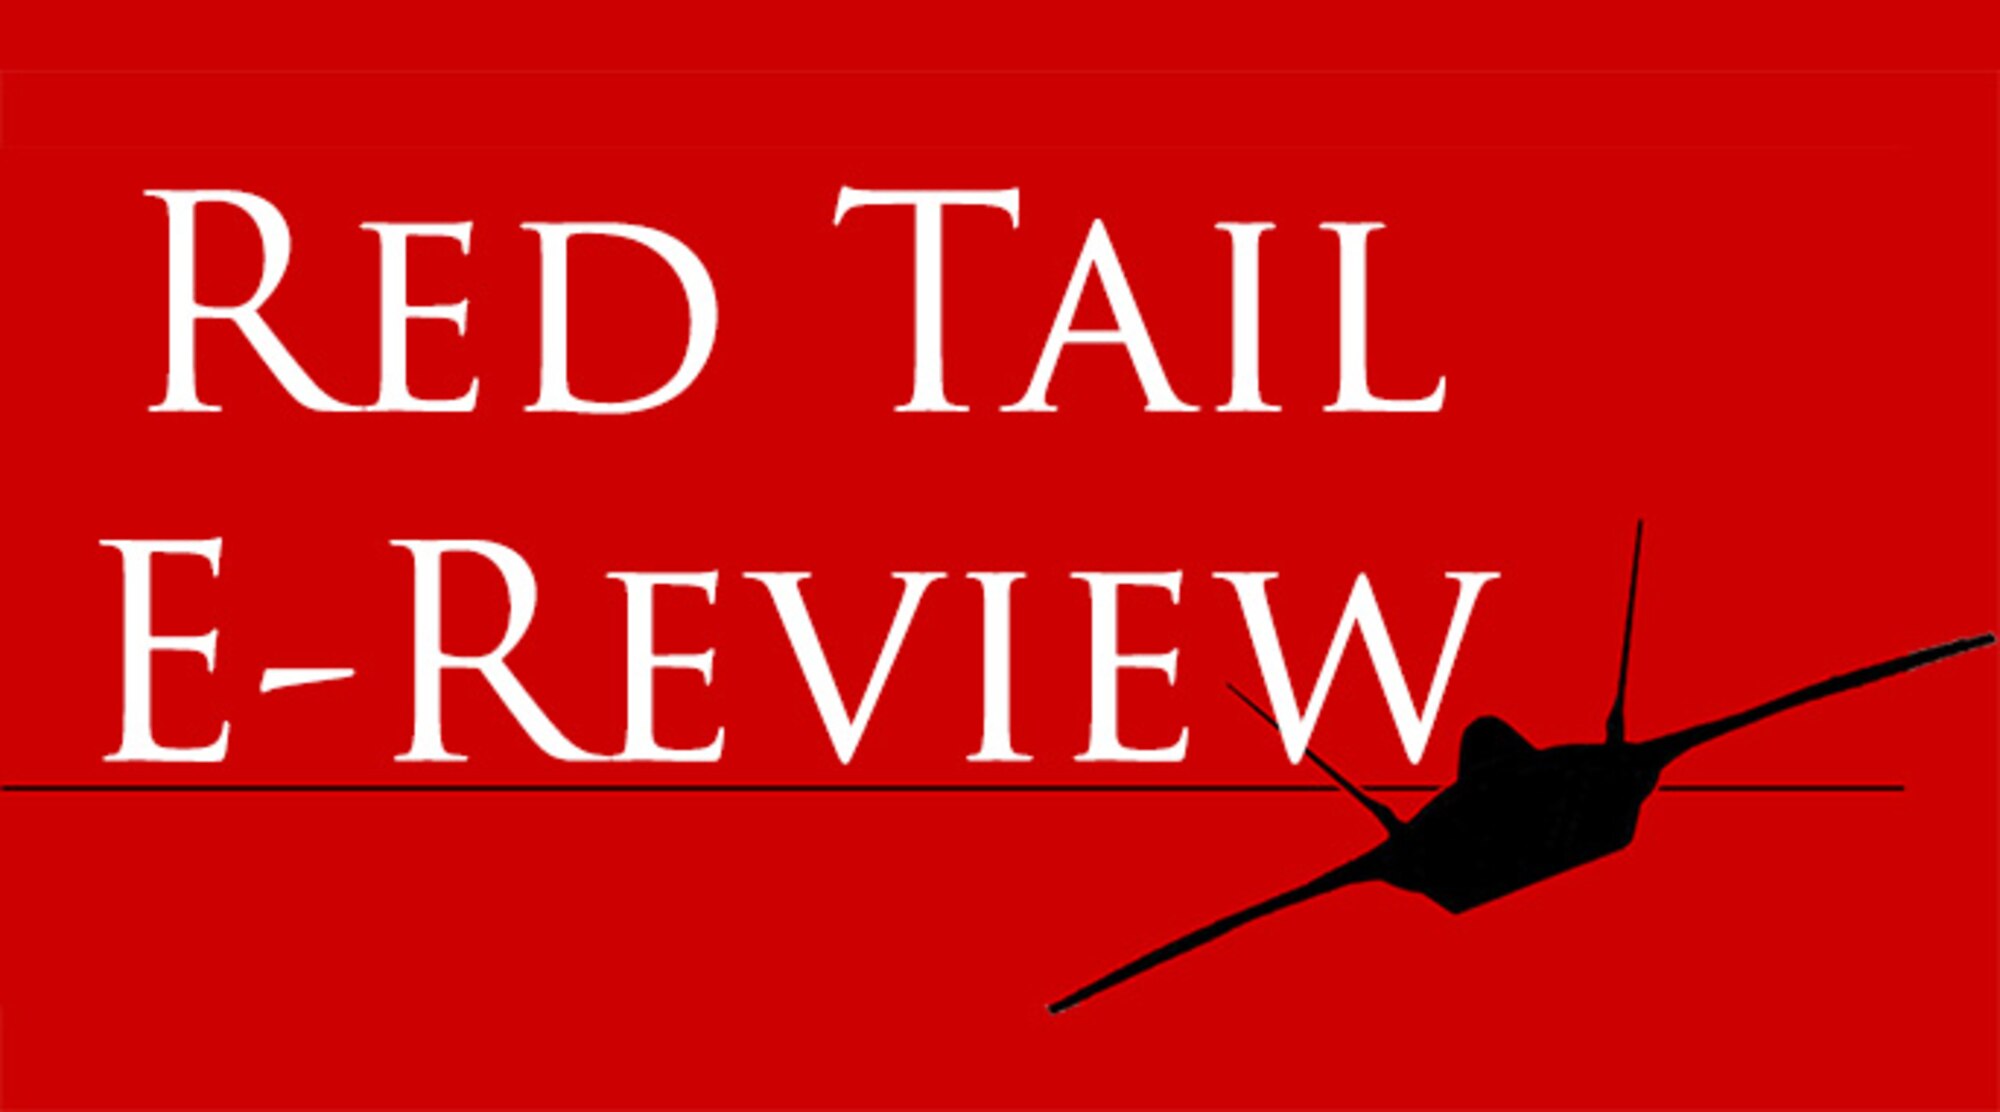 Red Tail E-Review graphic